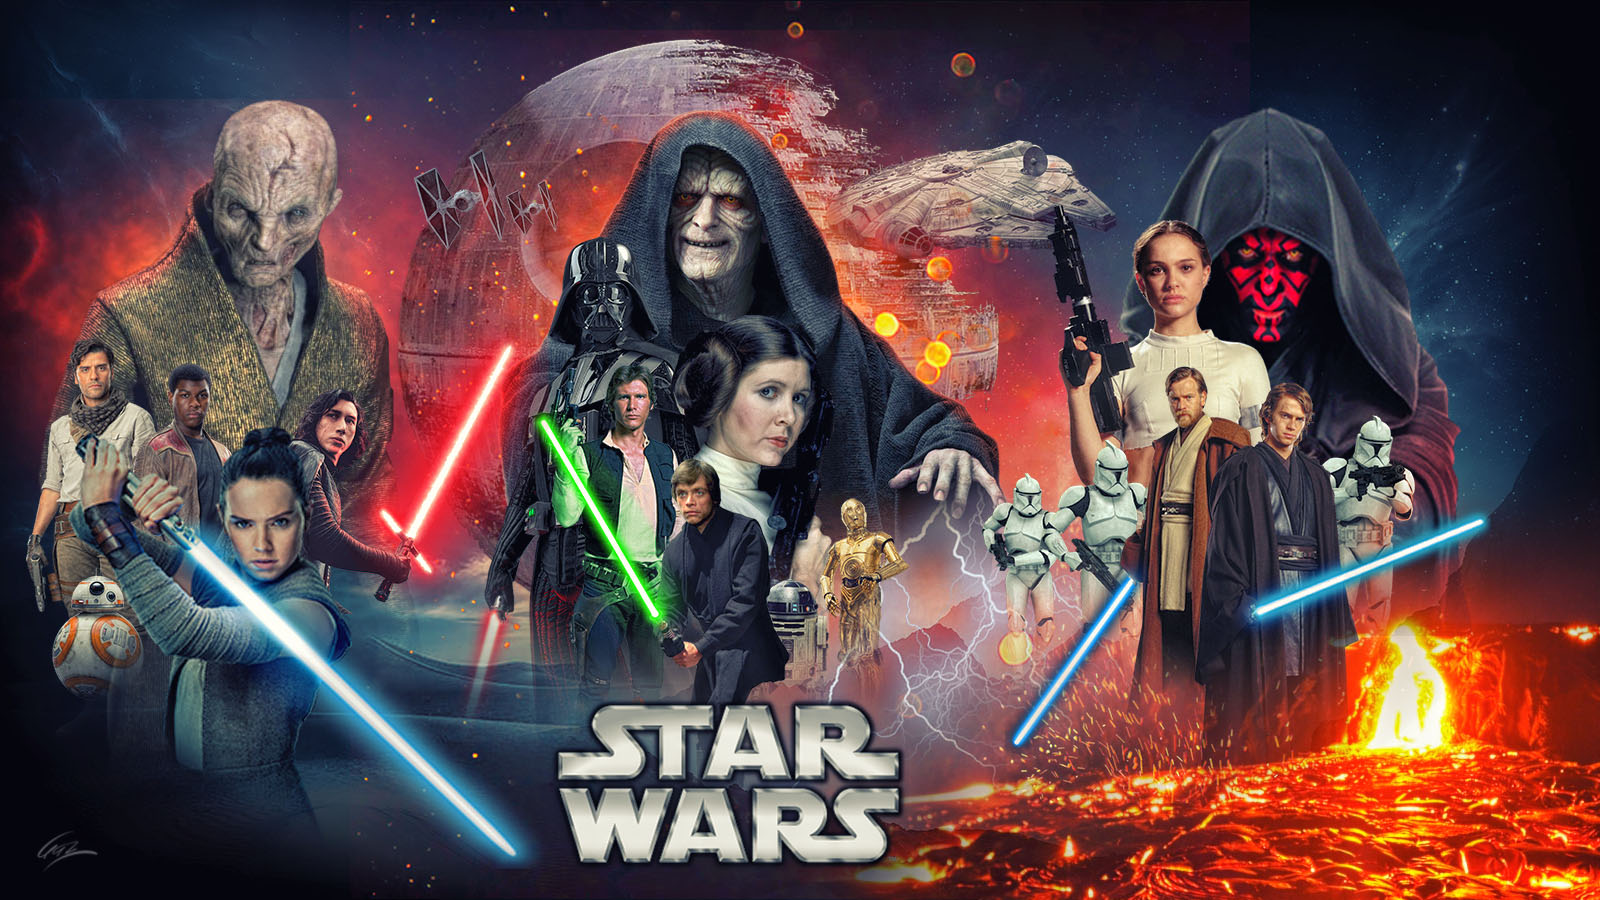 Star wars wallpaper by pzns on